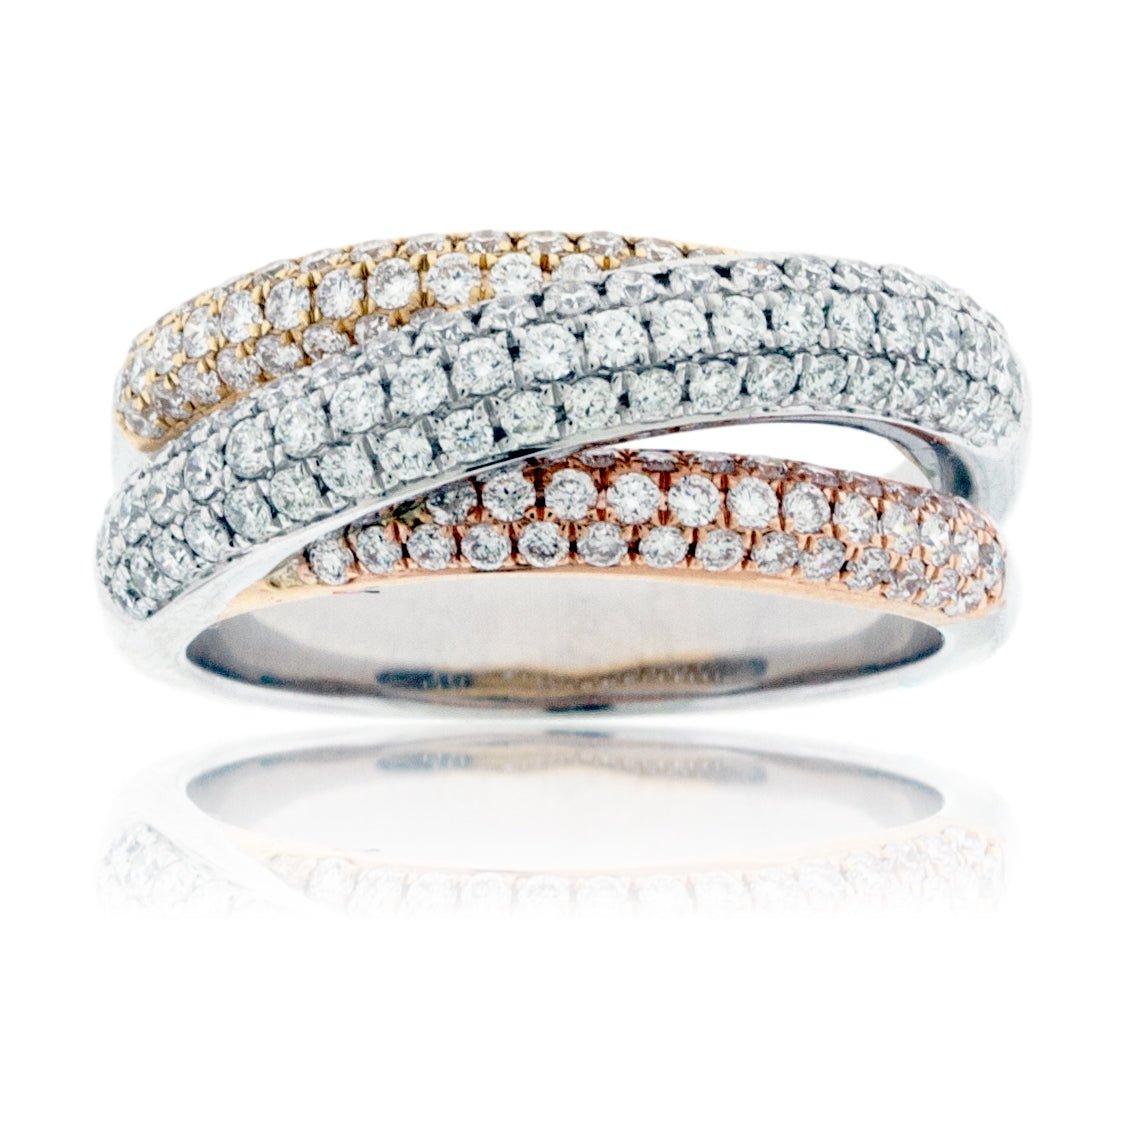 Tri-Gold Bypassing Diamond Fashion Statement Ring - Park City Jewelers